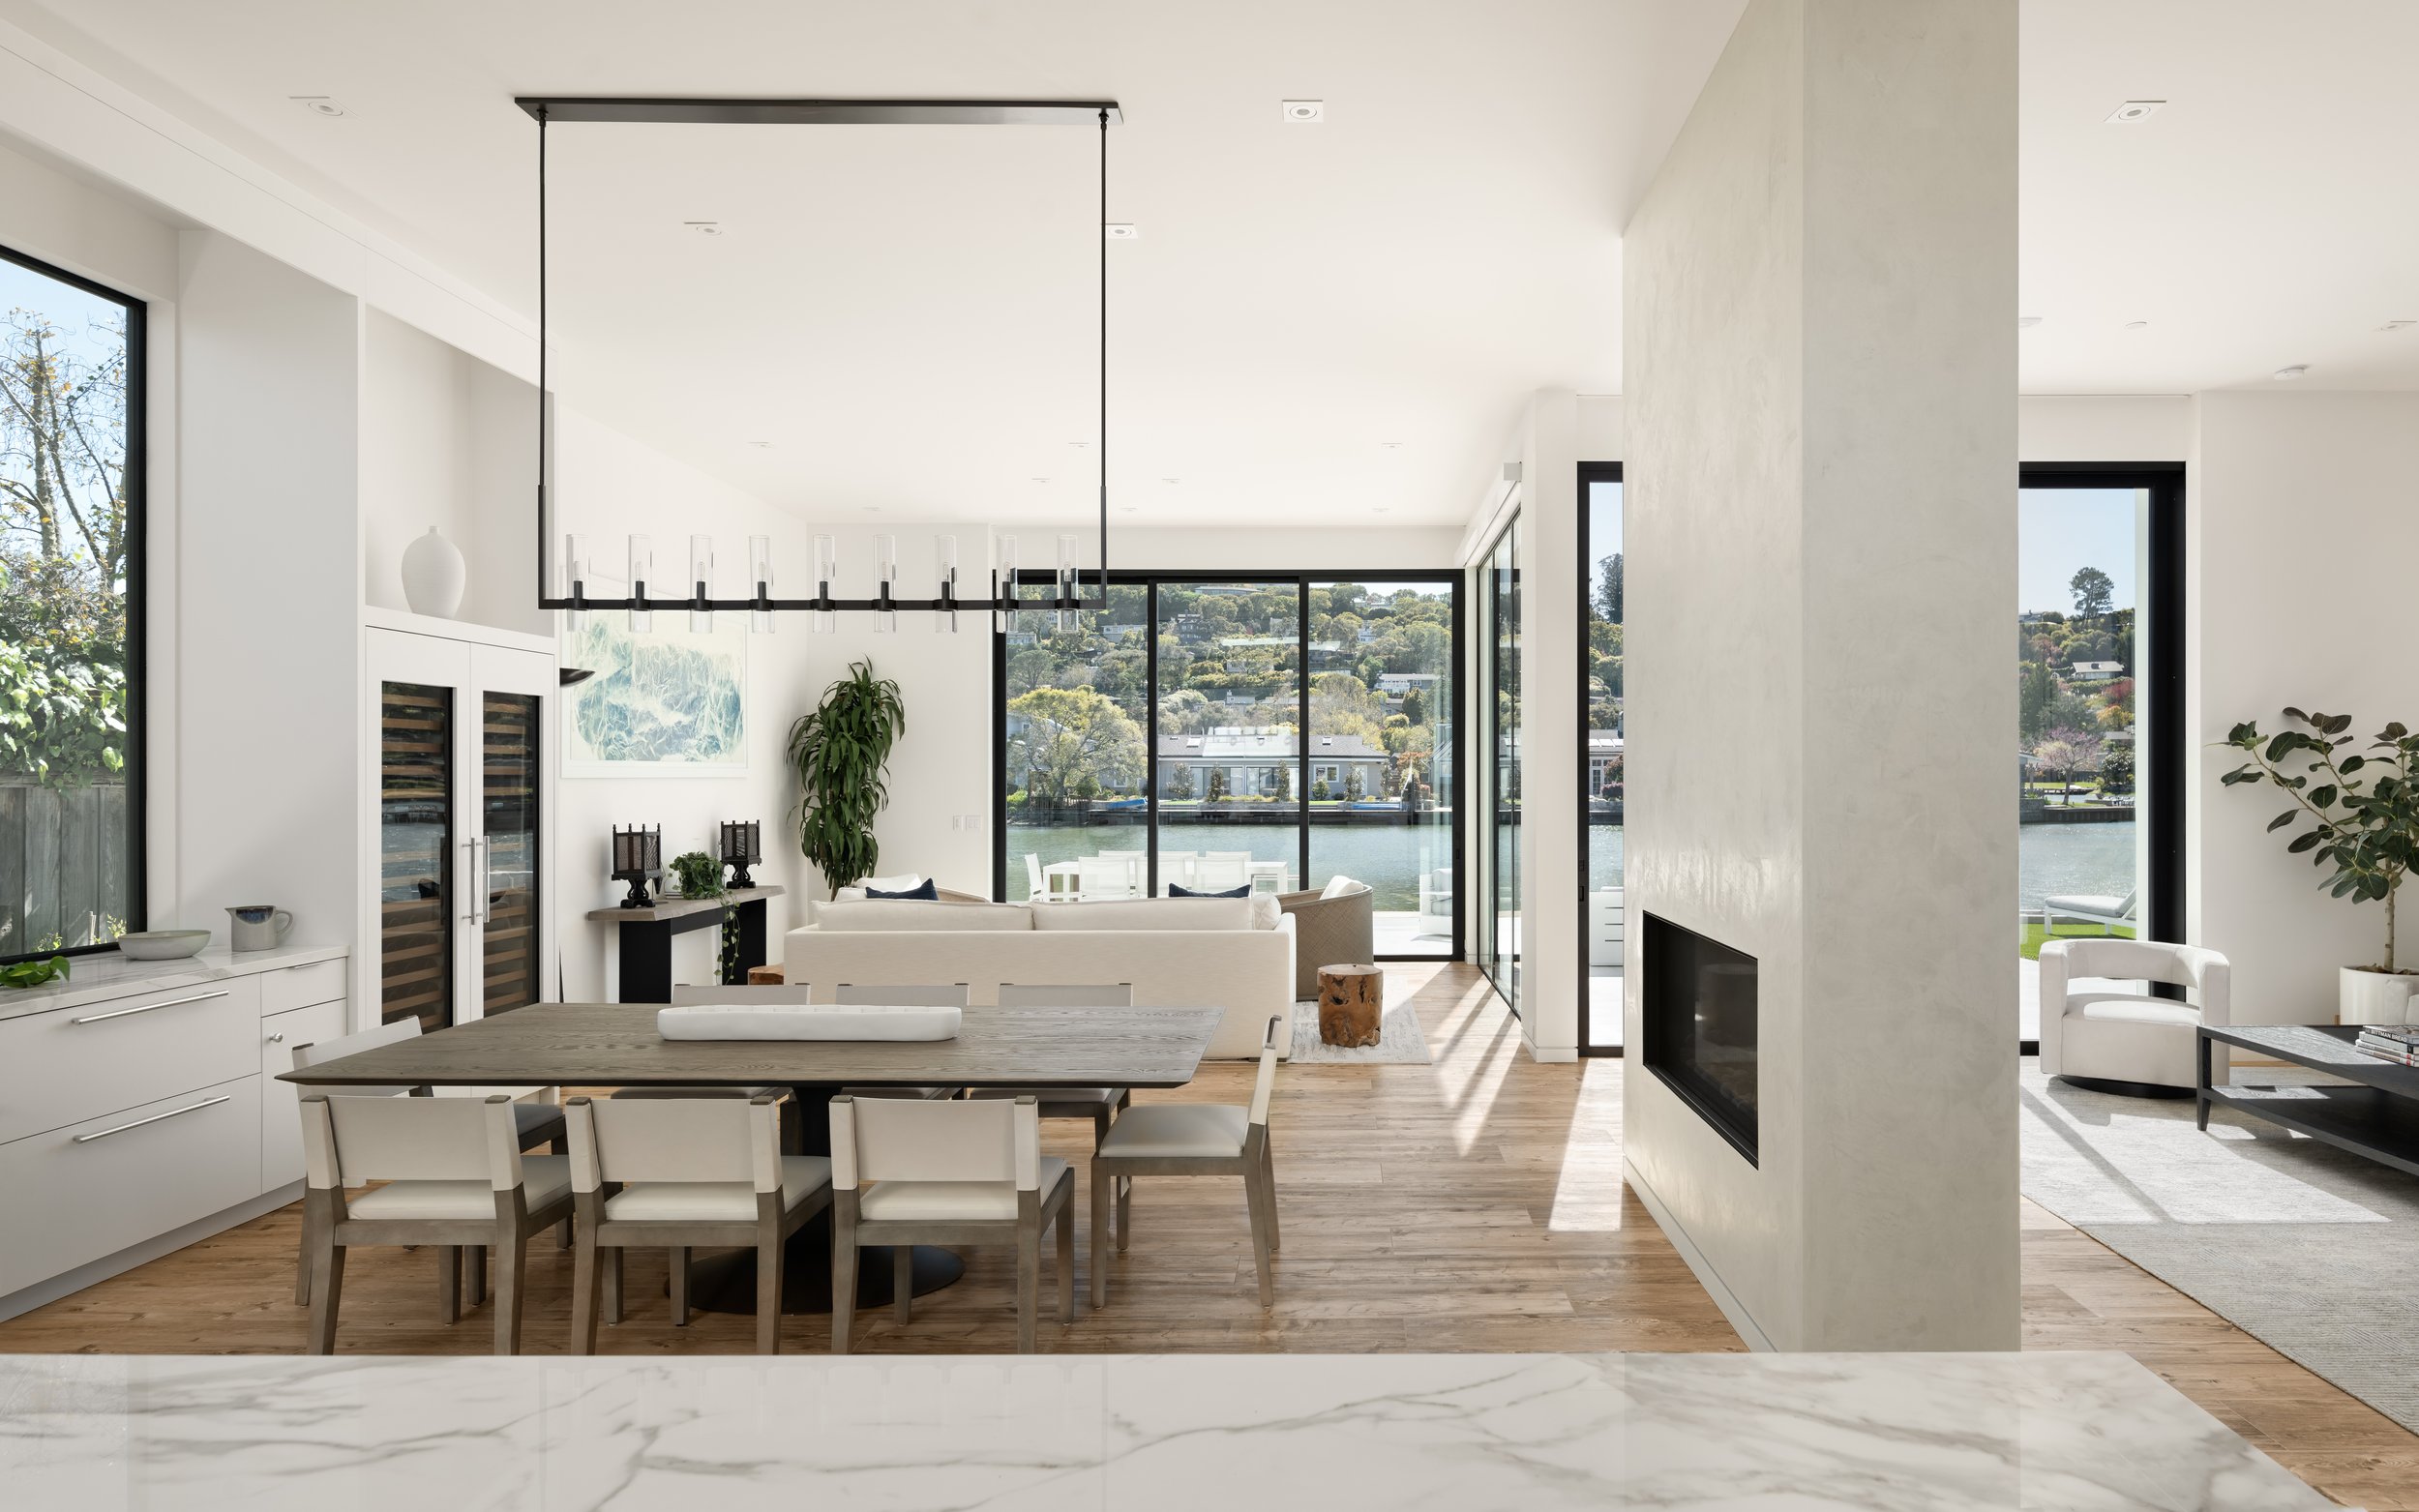  The interior space borrows light from the sides through large cross-sectional windows while the house spatially opens to the rear toward the lagoon. This combination of light and space, of primary and secondary cross axes, produces a home that is sp